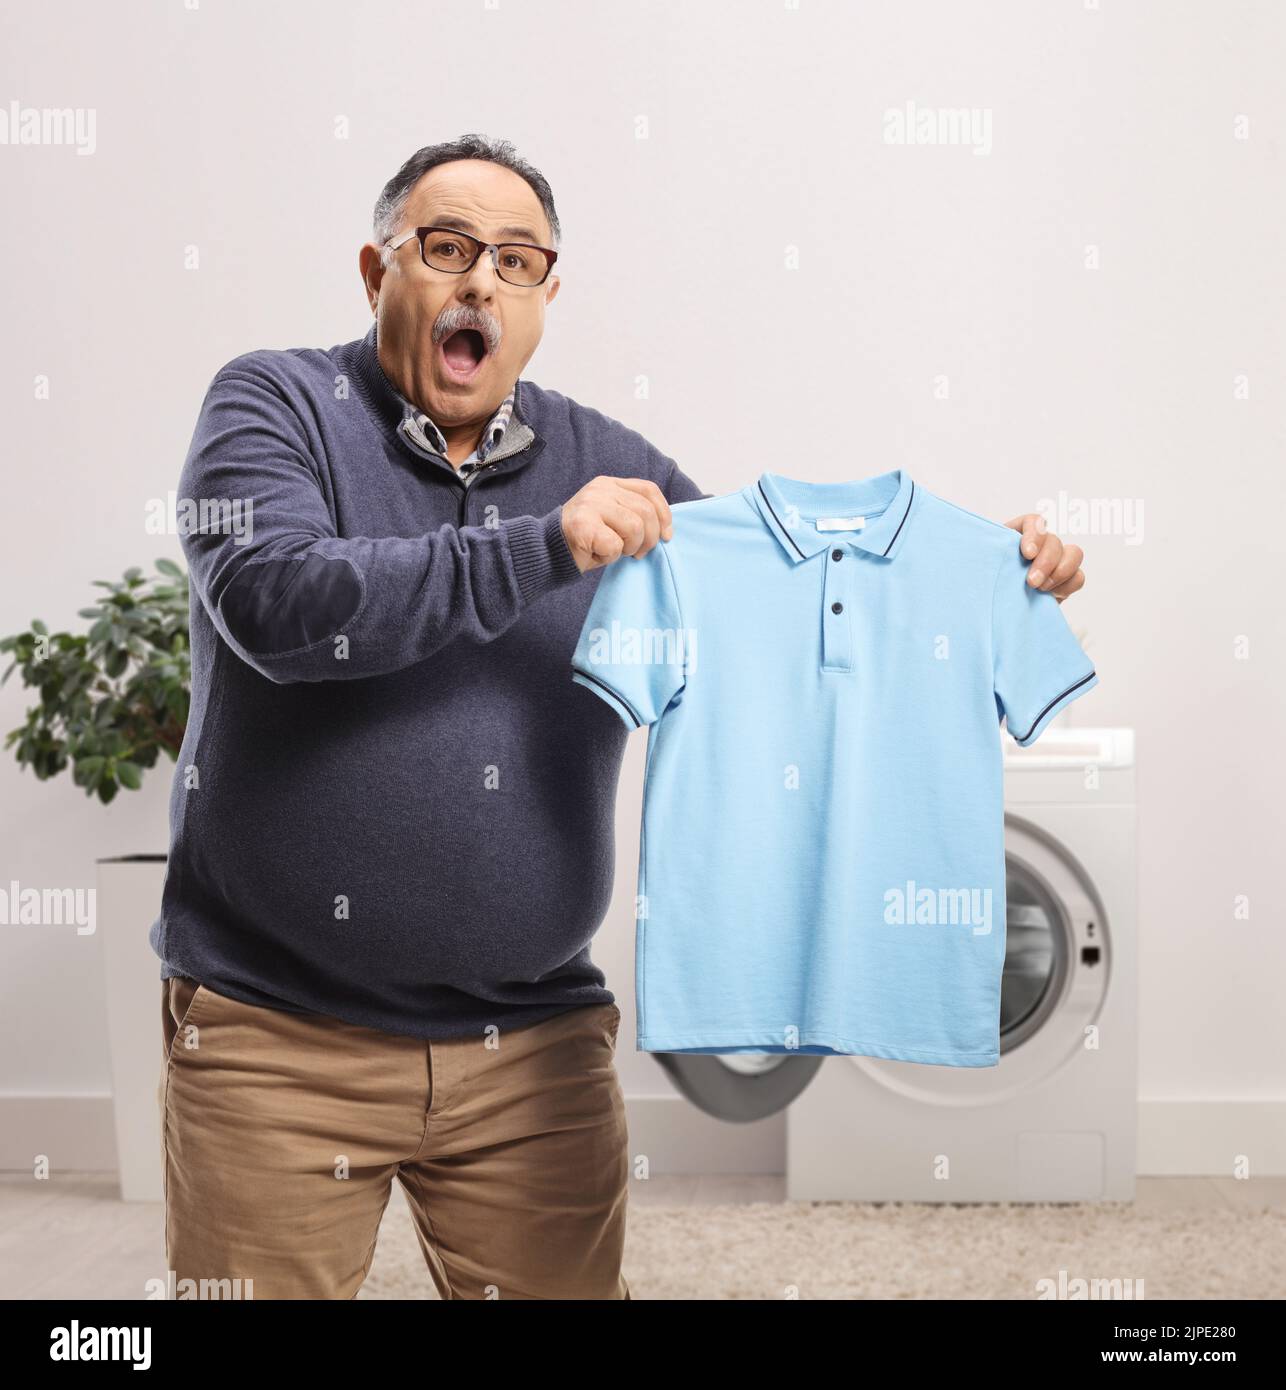 Confused mature man holding a shrunken t-shirt in front of a washing machine Stock Photo